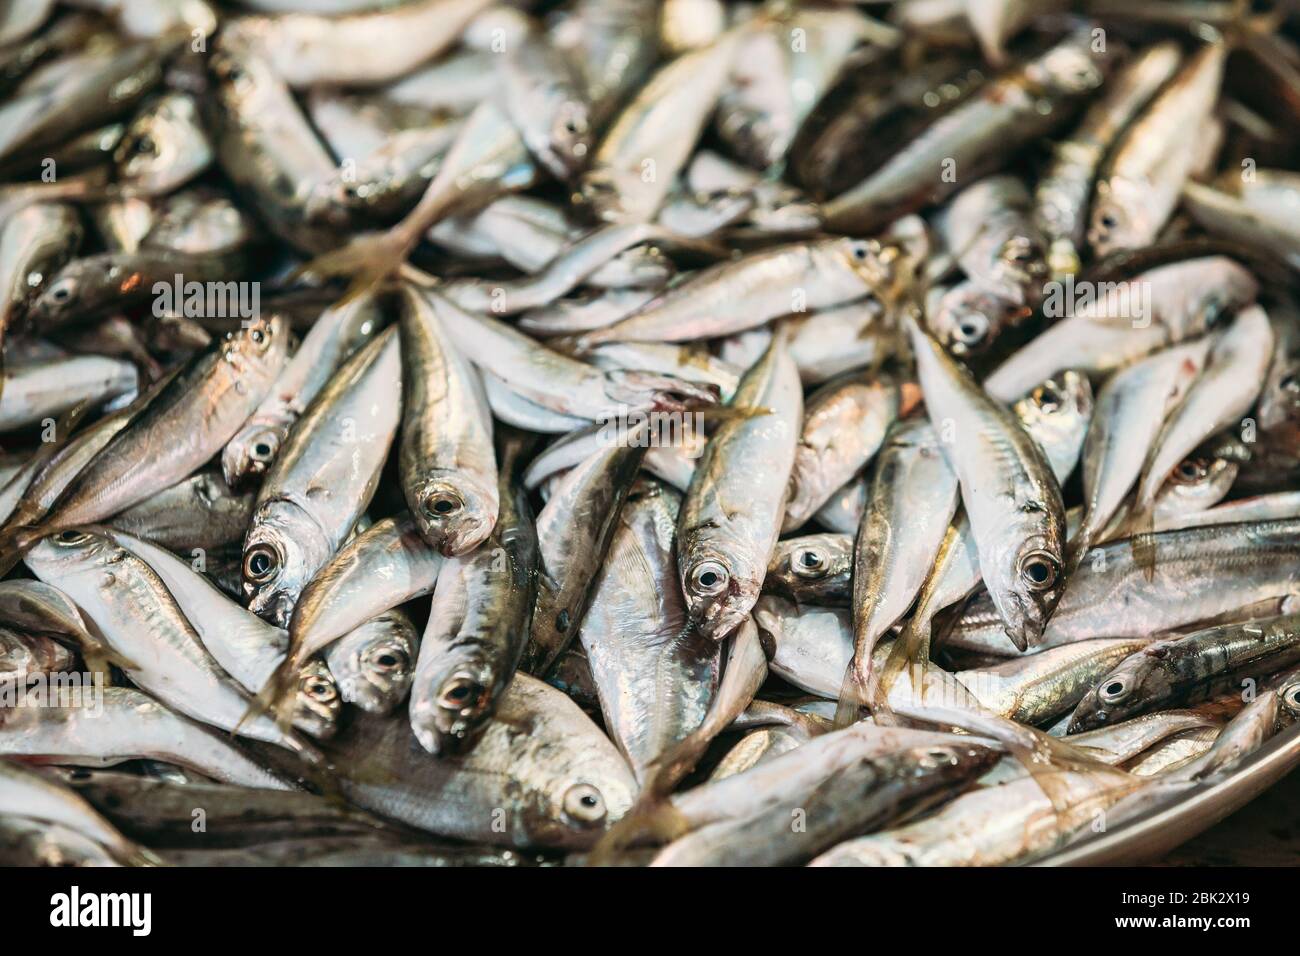 Fresh European Anchovy Fish On Display On Ice On Fishermen Market Store Shop. Seafood Fish Background. European Anchovy Is A Forage Fish Somewhat Rela Stock Photo